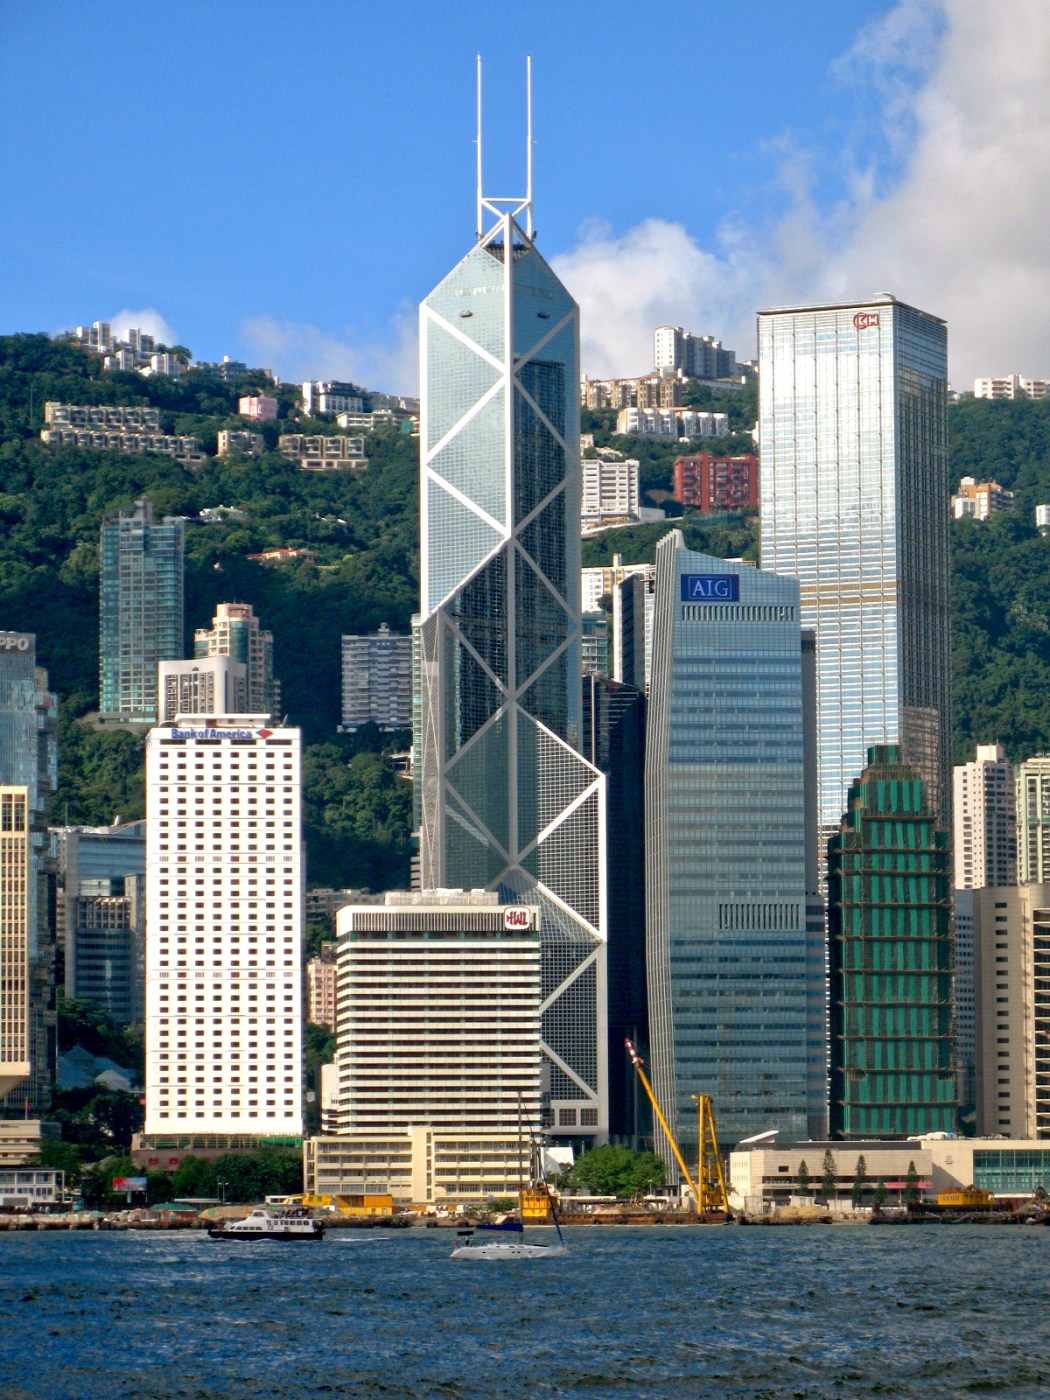 Hong Kong's Bank of China tower, designed by late Chinese-American architect I.M. Pei. Photo: Wikicommons.